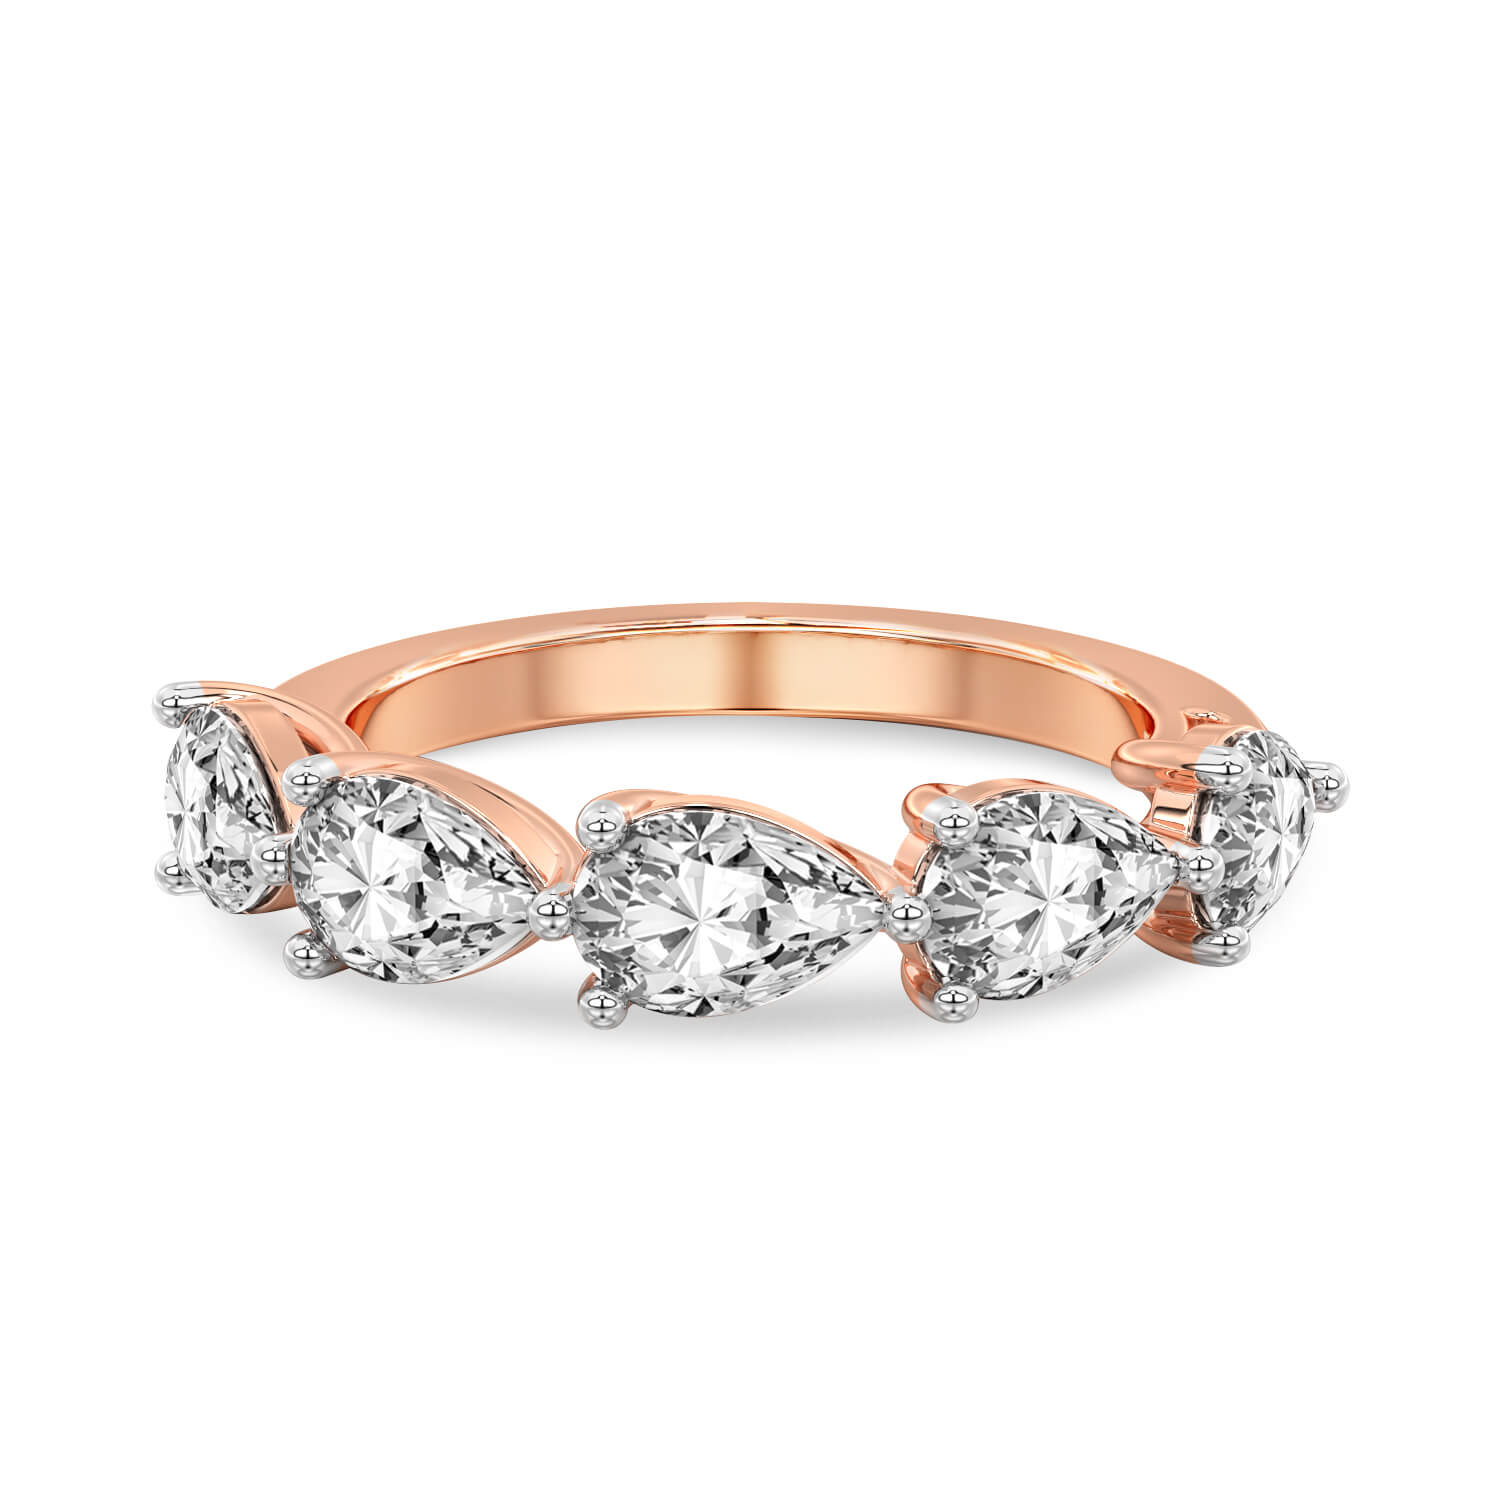 Penelope Pear Lab Diamond Anniversary Band front view